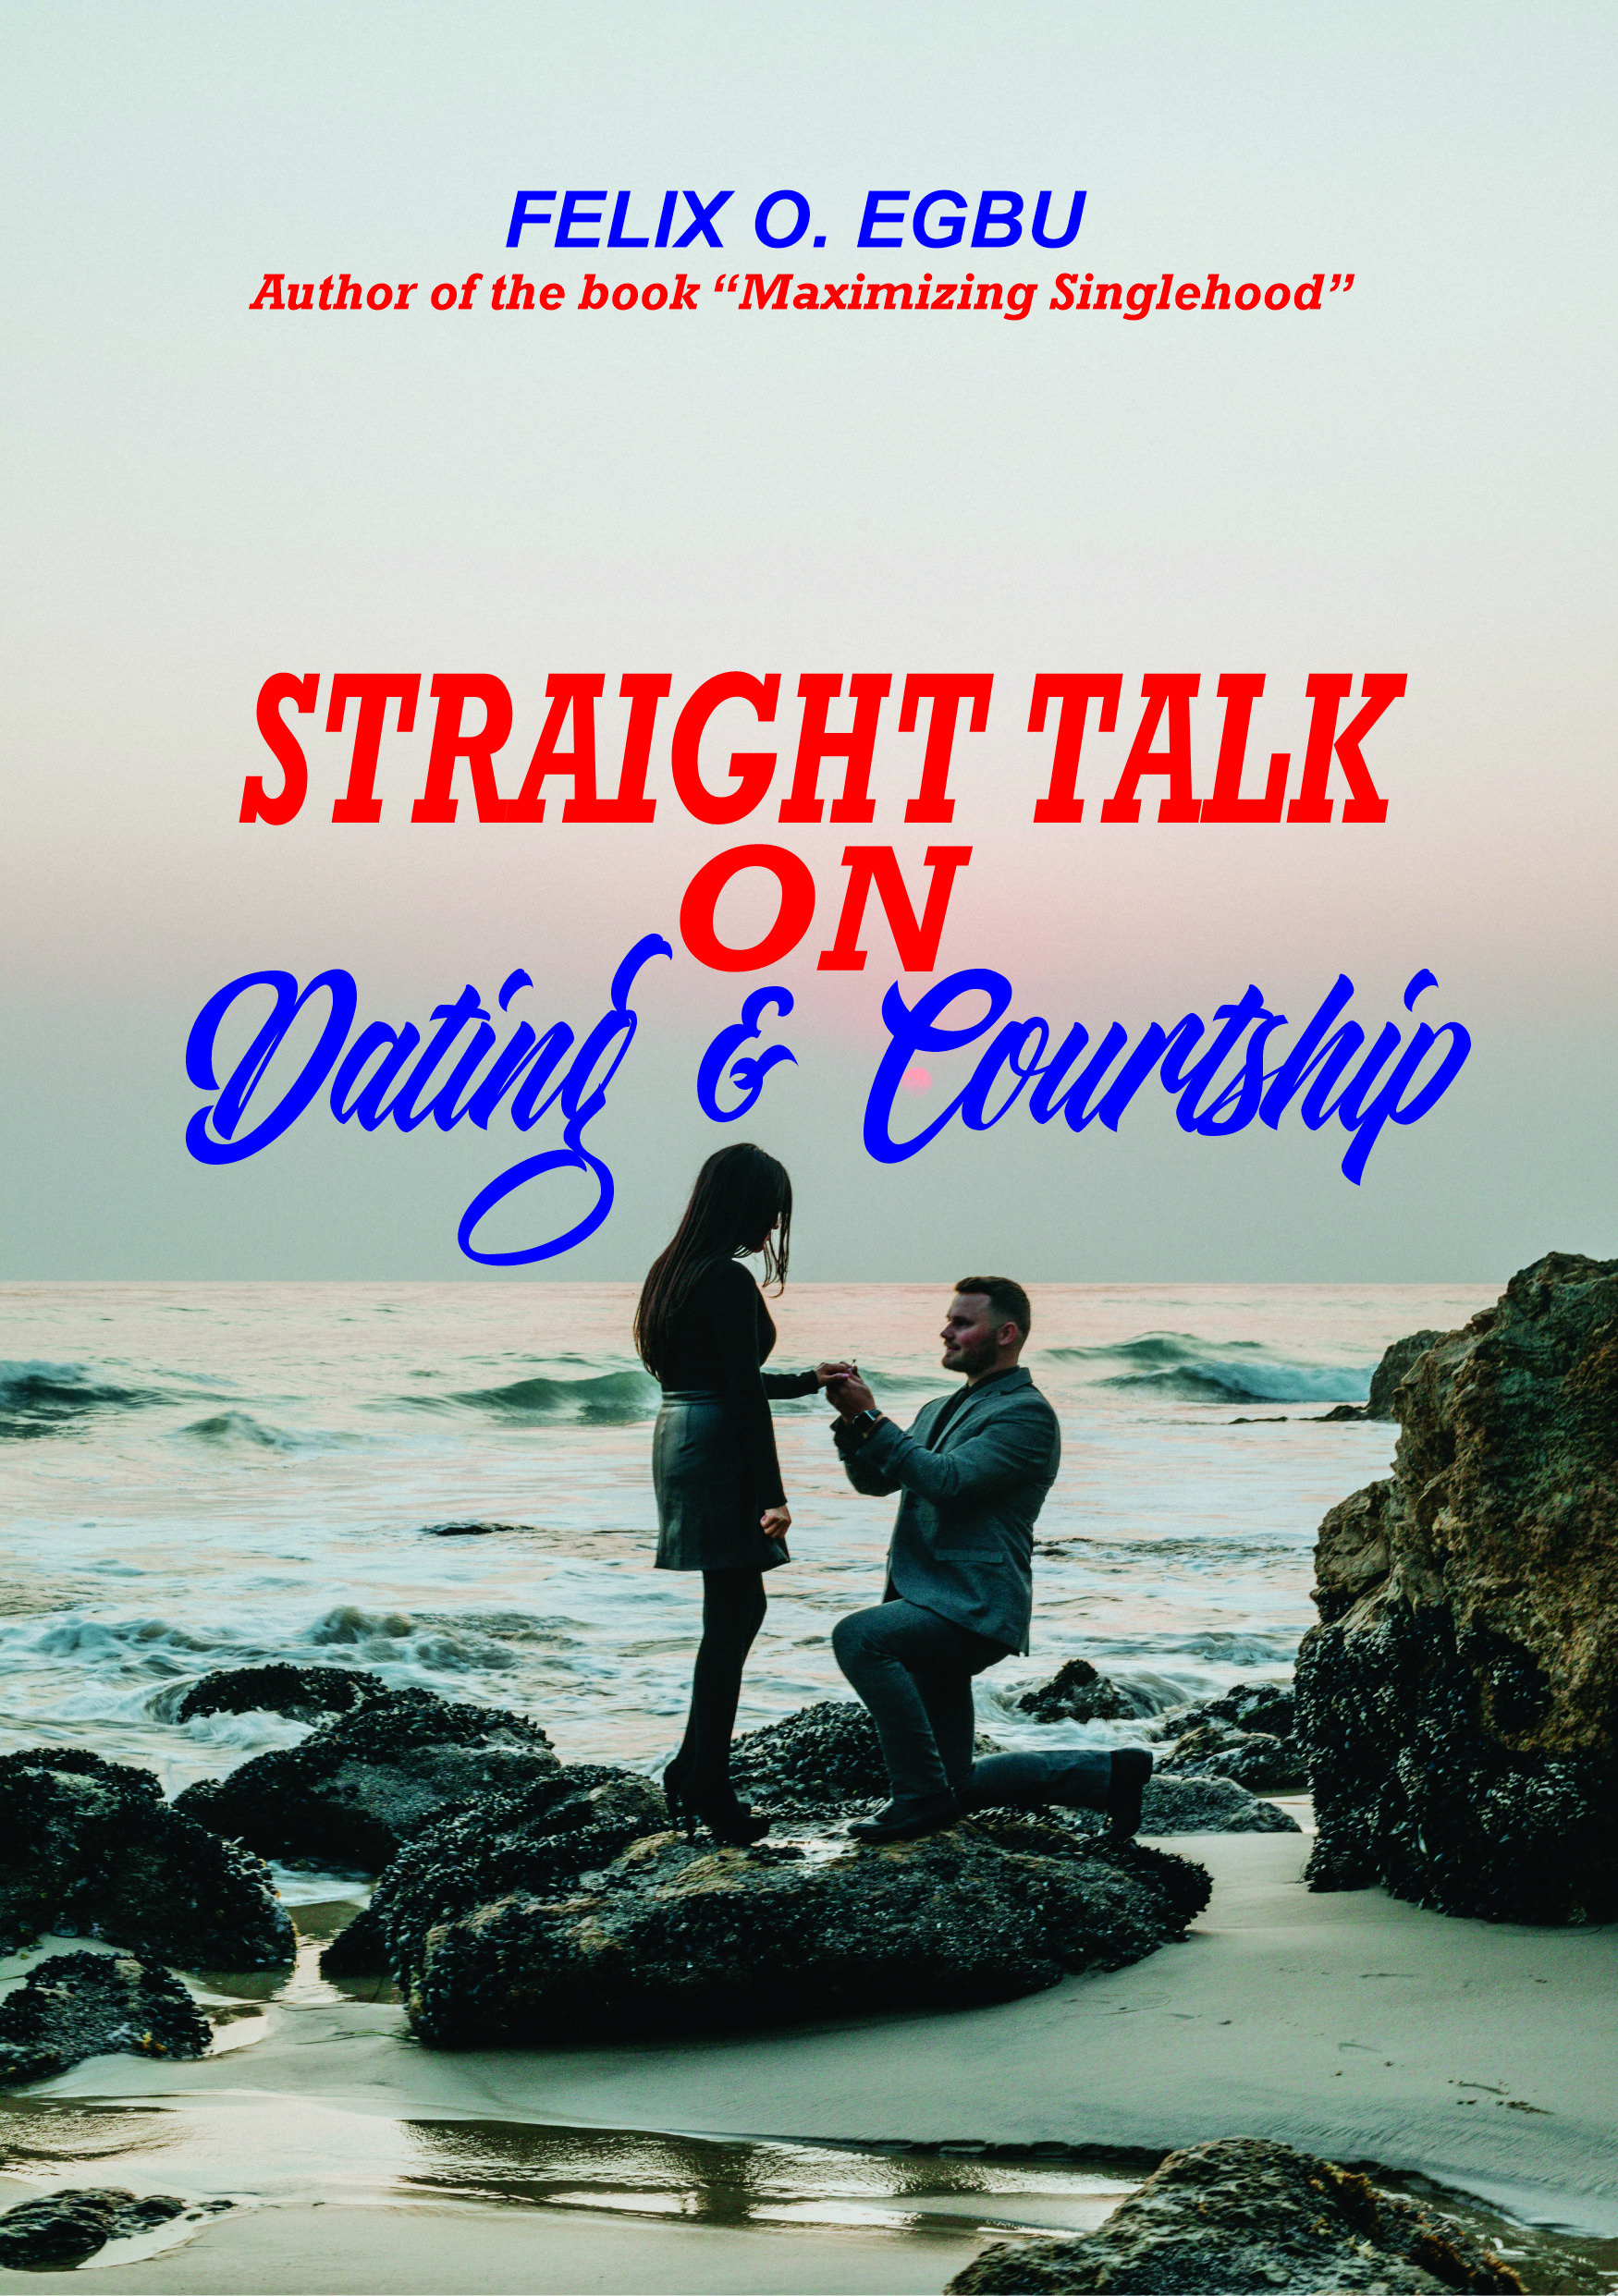 Straight-Talk-on-Dating-and-Courtship